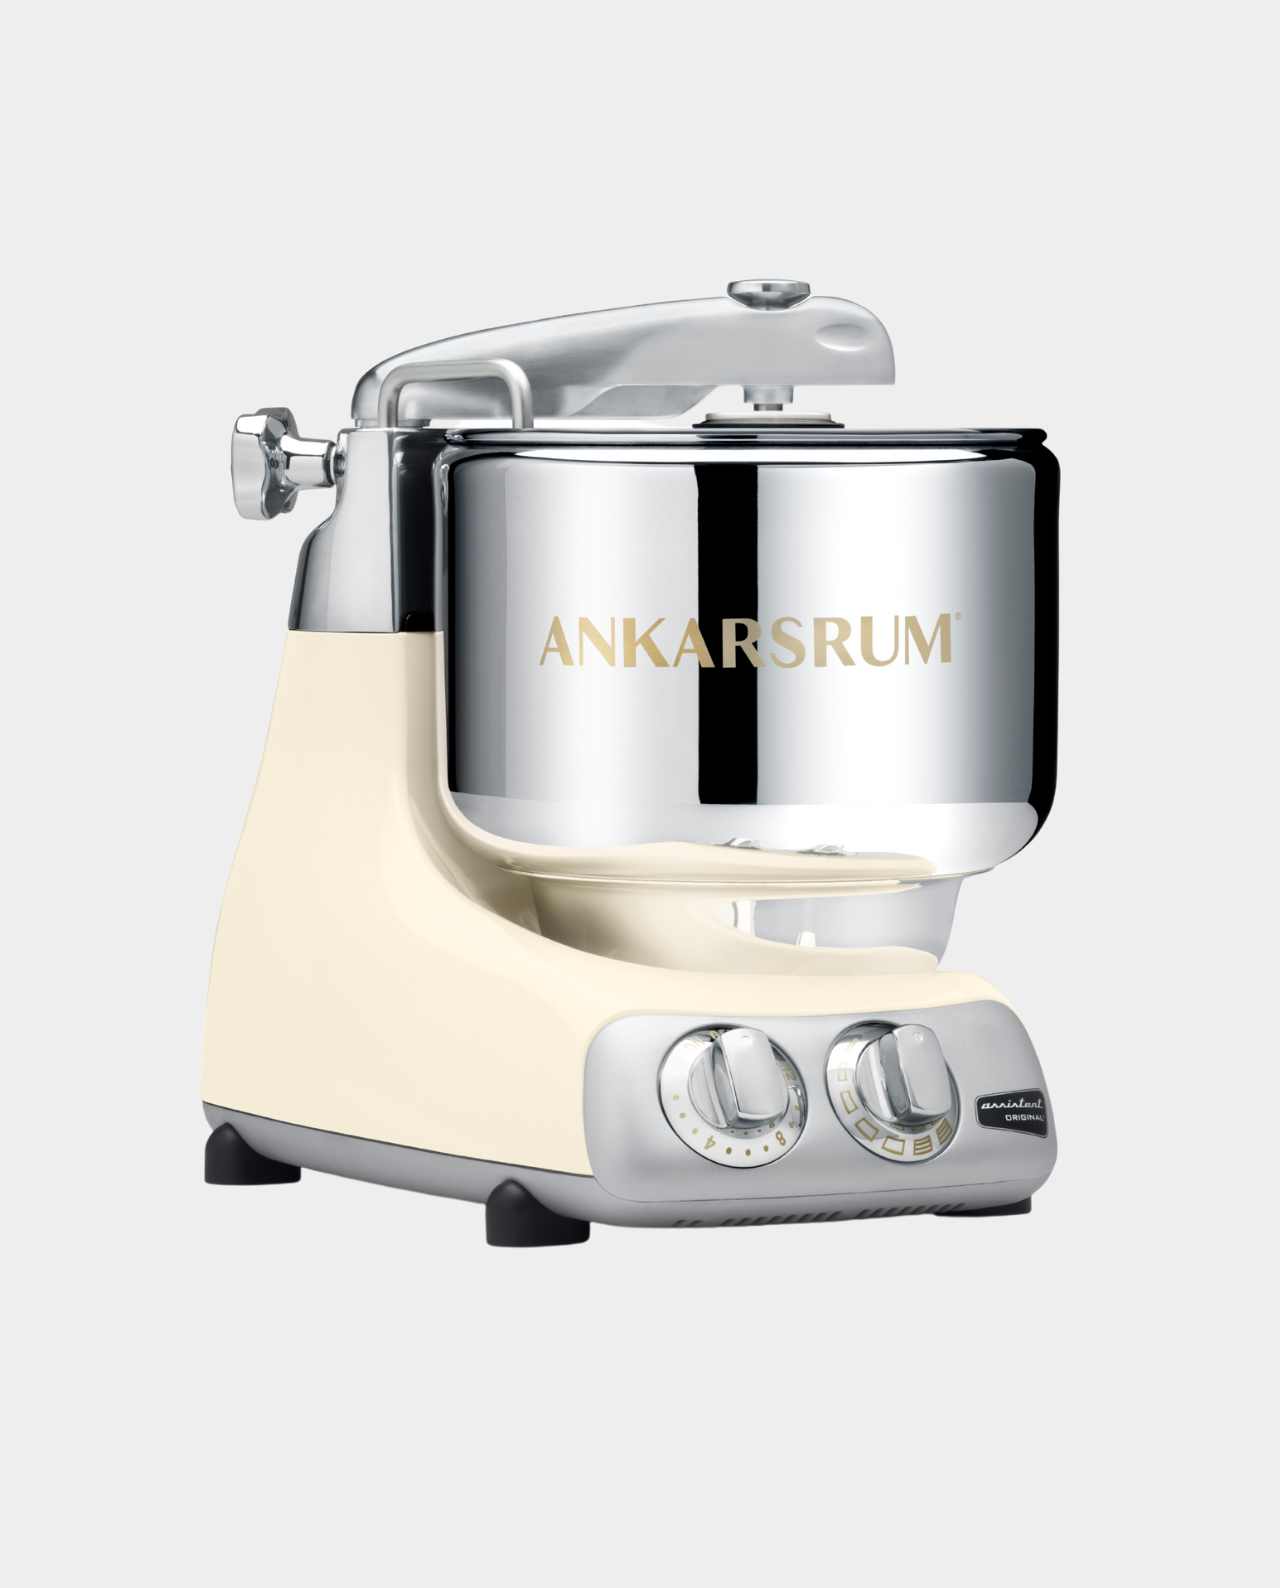 Stand mixer juicer attachment for Ankarsrum stand mixer, Ankarsrum